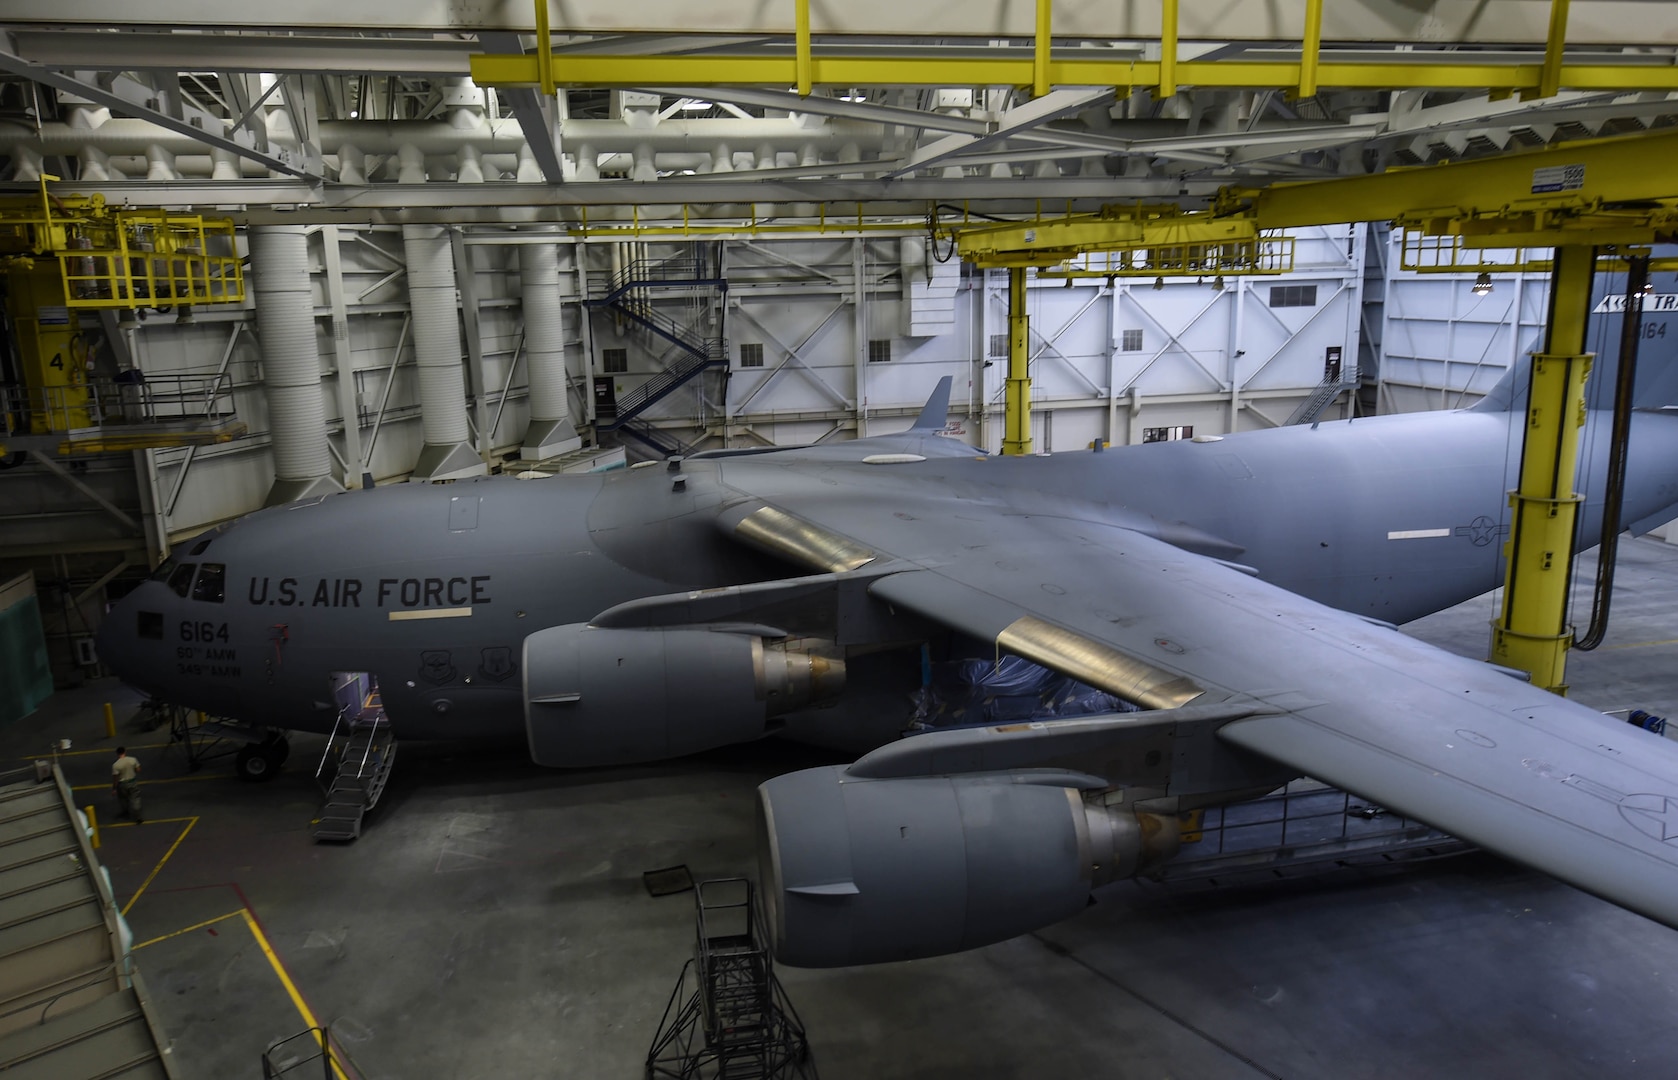 A C-17 Globemaster III from Travis Air Force Base, Calif., sits in a paint barn hangar for paint touch-ups Aug. 6, 2018, at Joint Base Lewis-McChord, Wash. California laws prevent Travis Airmen from spray-painting their C-17s, so they brought it to McChord where it is allowed. (U.S. Air Force photo by Senior Airman Tryphena Mayhugh)